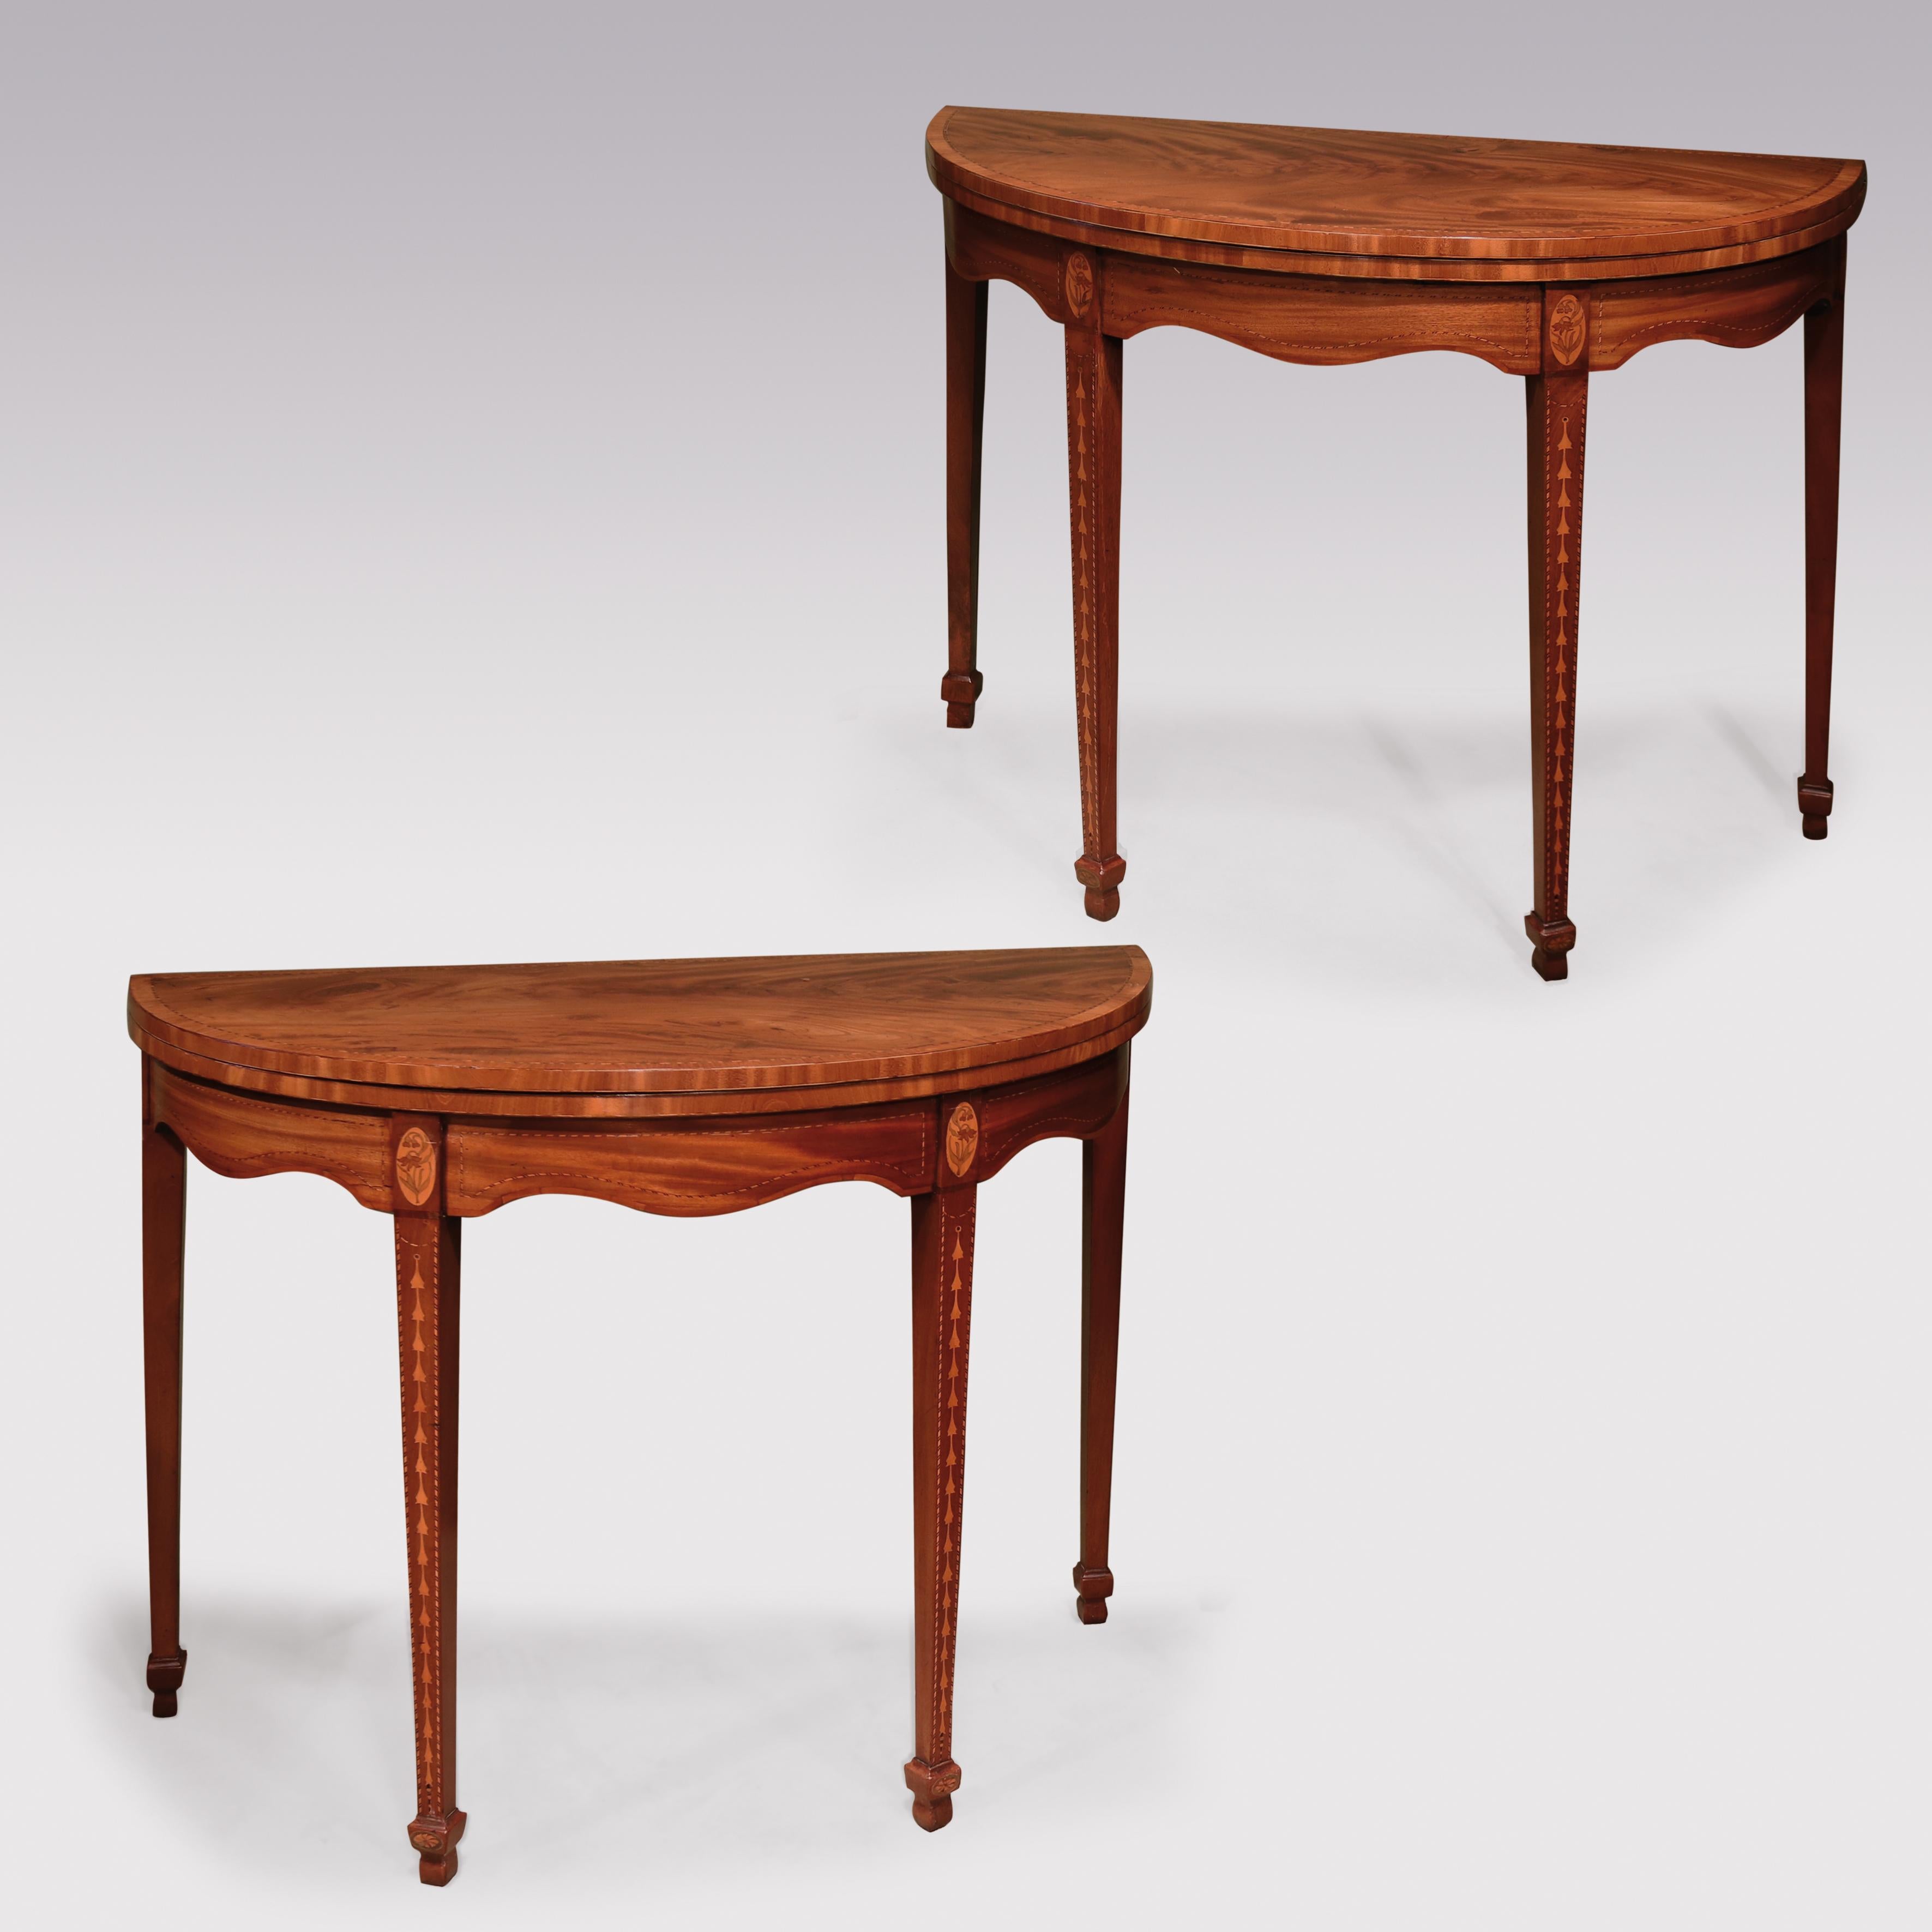 An attractive pair of late 18th century Sheraton period figured and faded mahogany card tables chequered strung throughout, having tulipwood cross-banded half round tops above serpentine shaped friezes with oval inlaid lily of the valley panels,